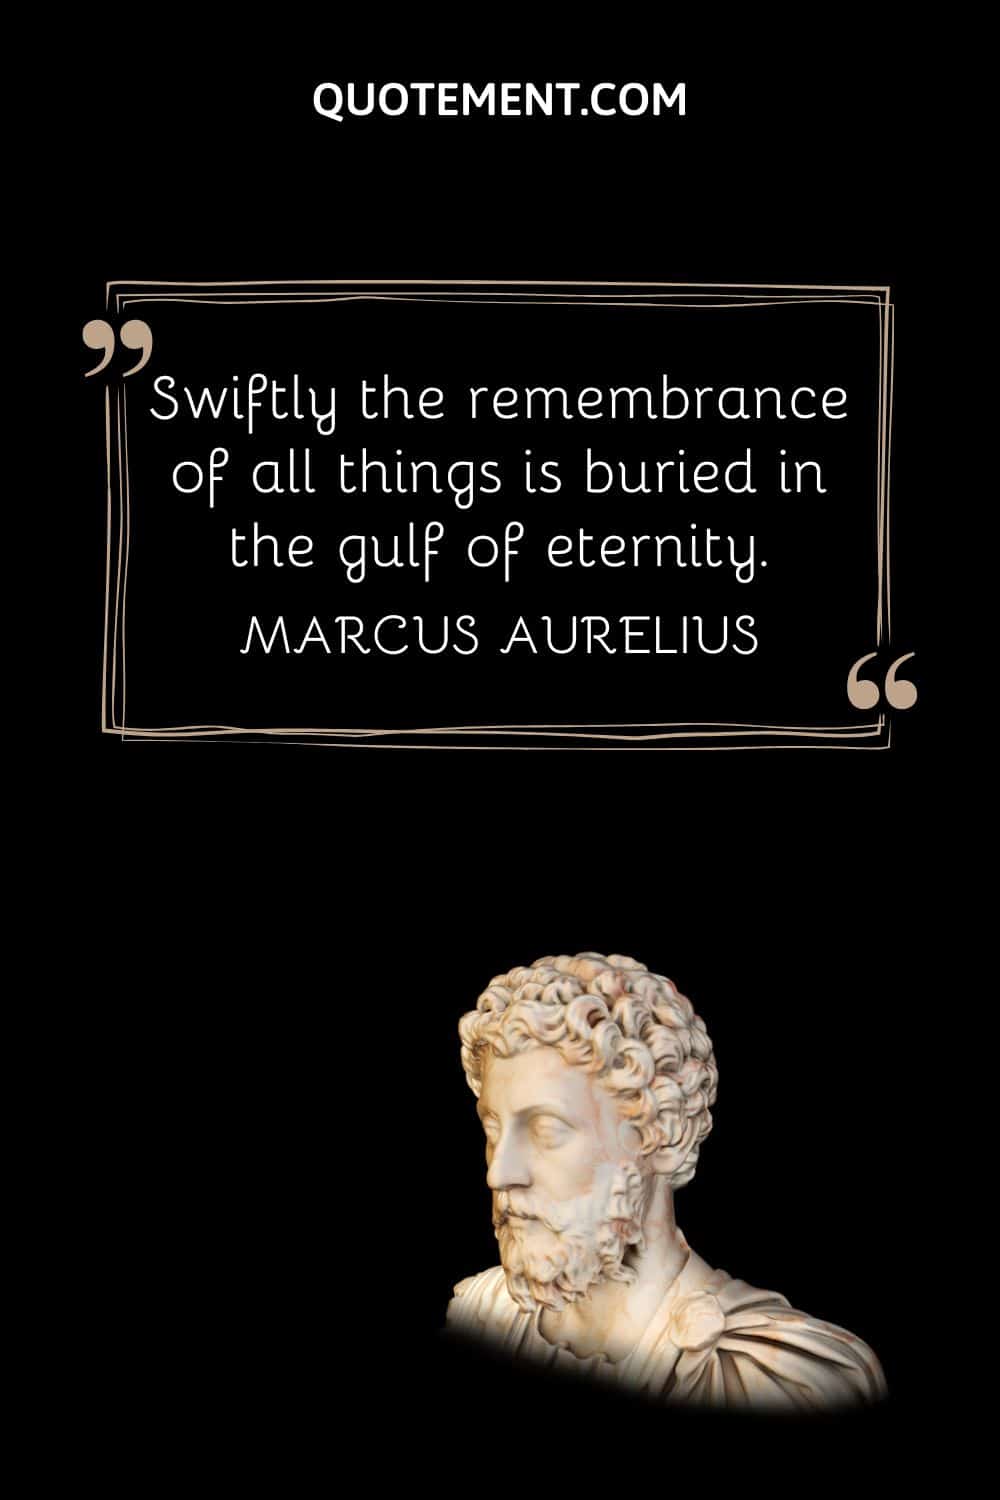 “Swiftly the remembrance of all things is buried in the gulf of eternity.” ― Marcus Aurelius